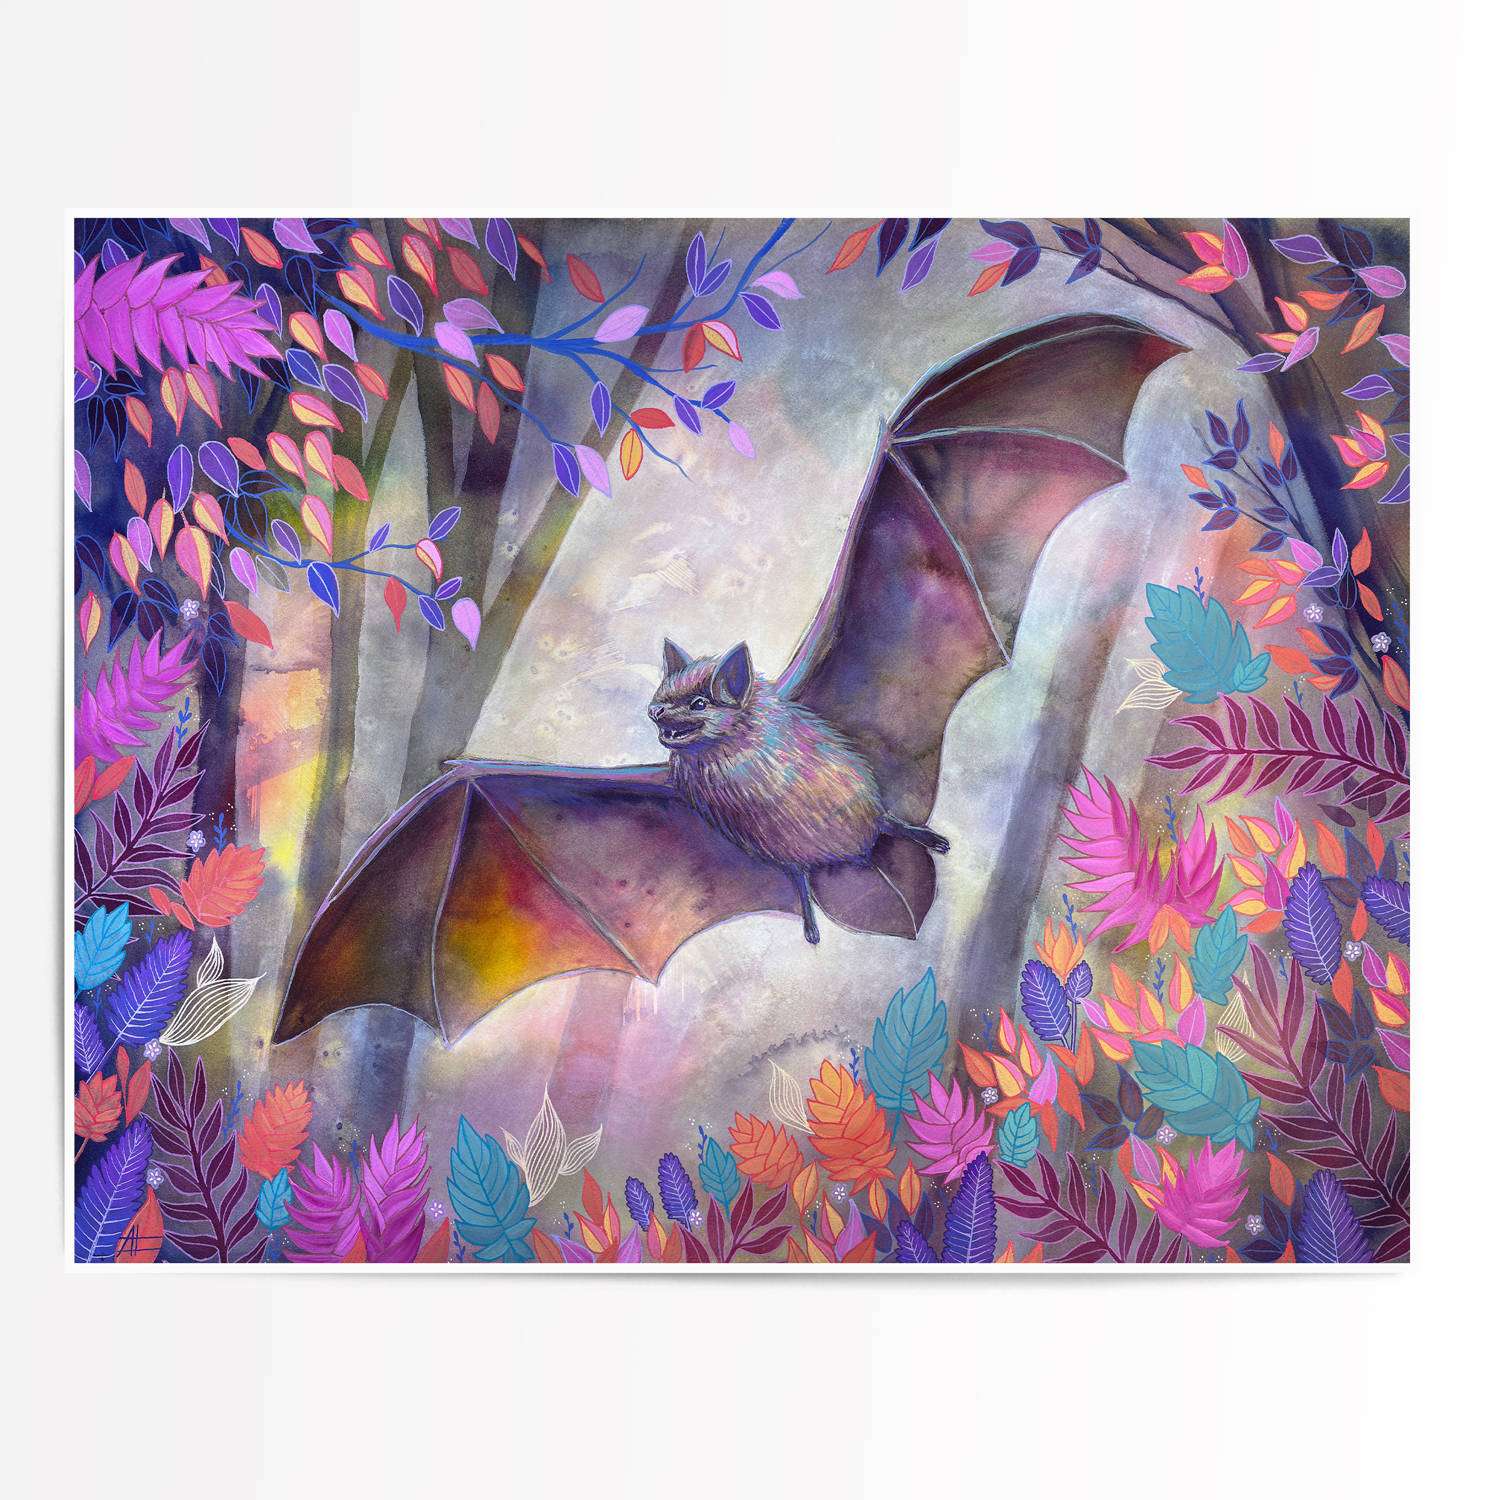 Single large art print of a bat among vivid foliage, demonstrating intricate detail and color.